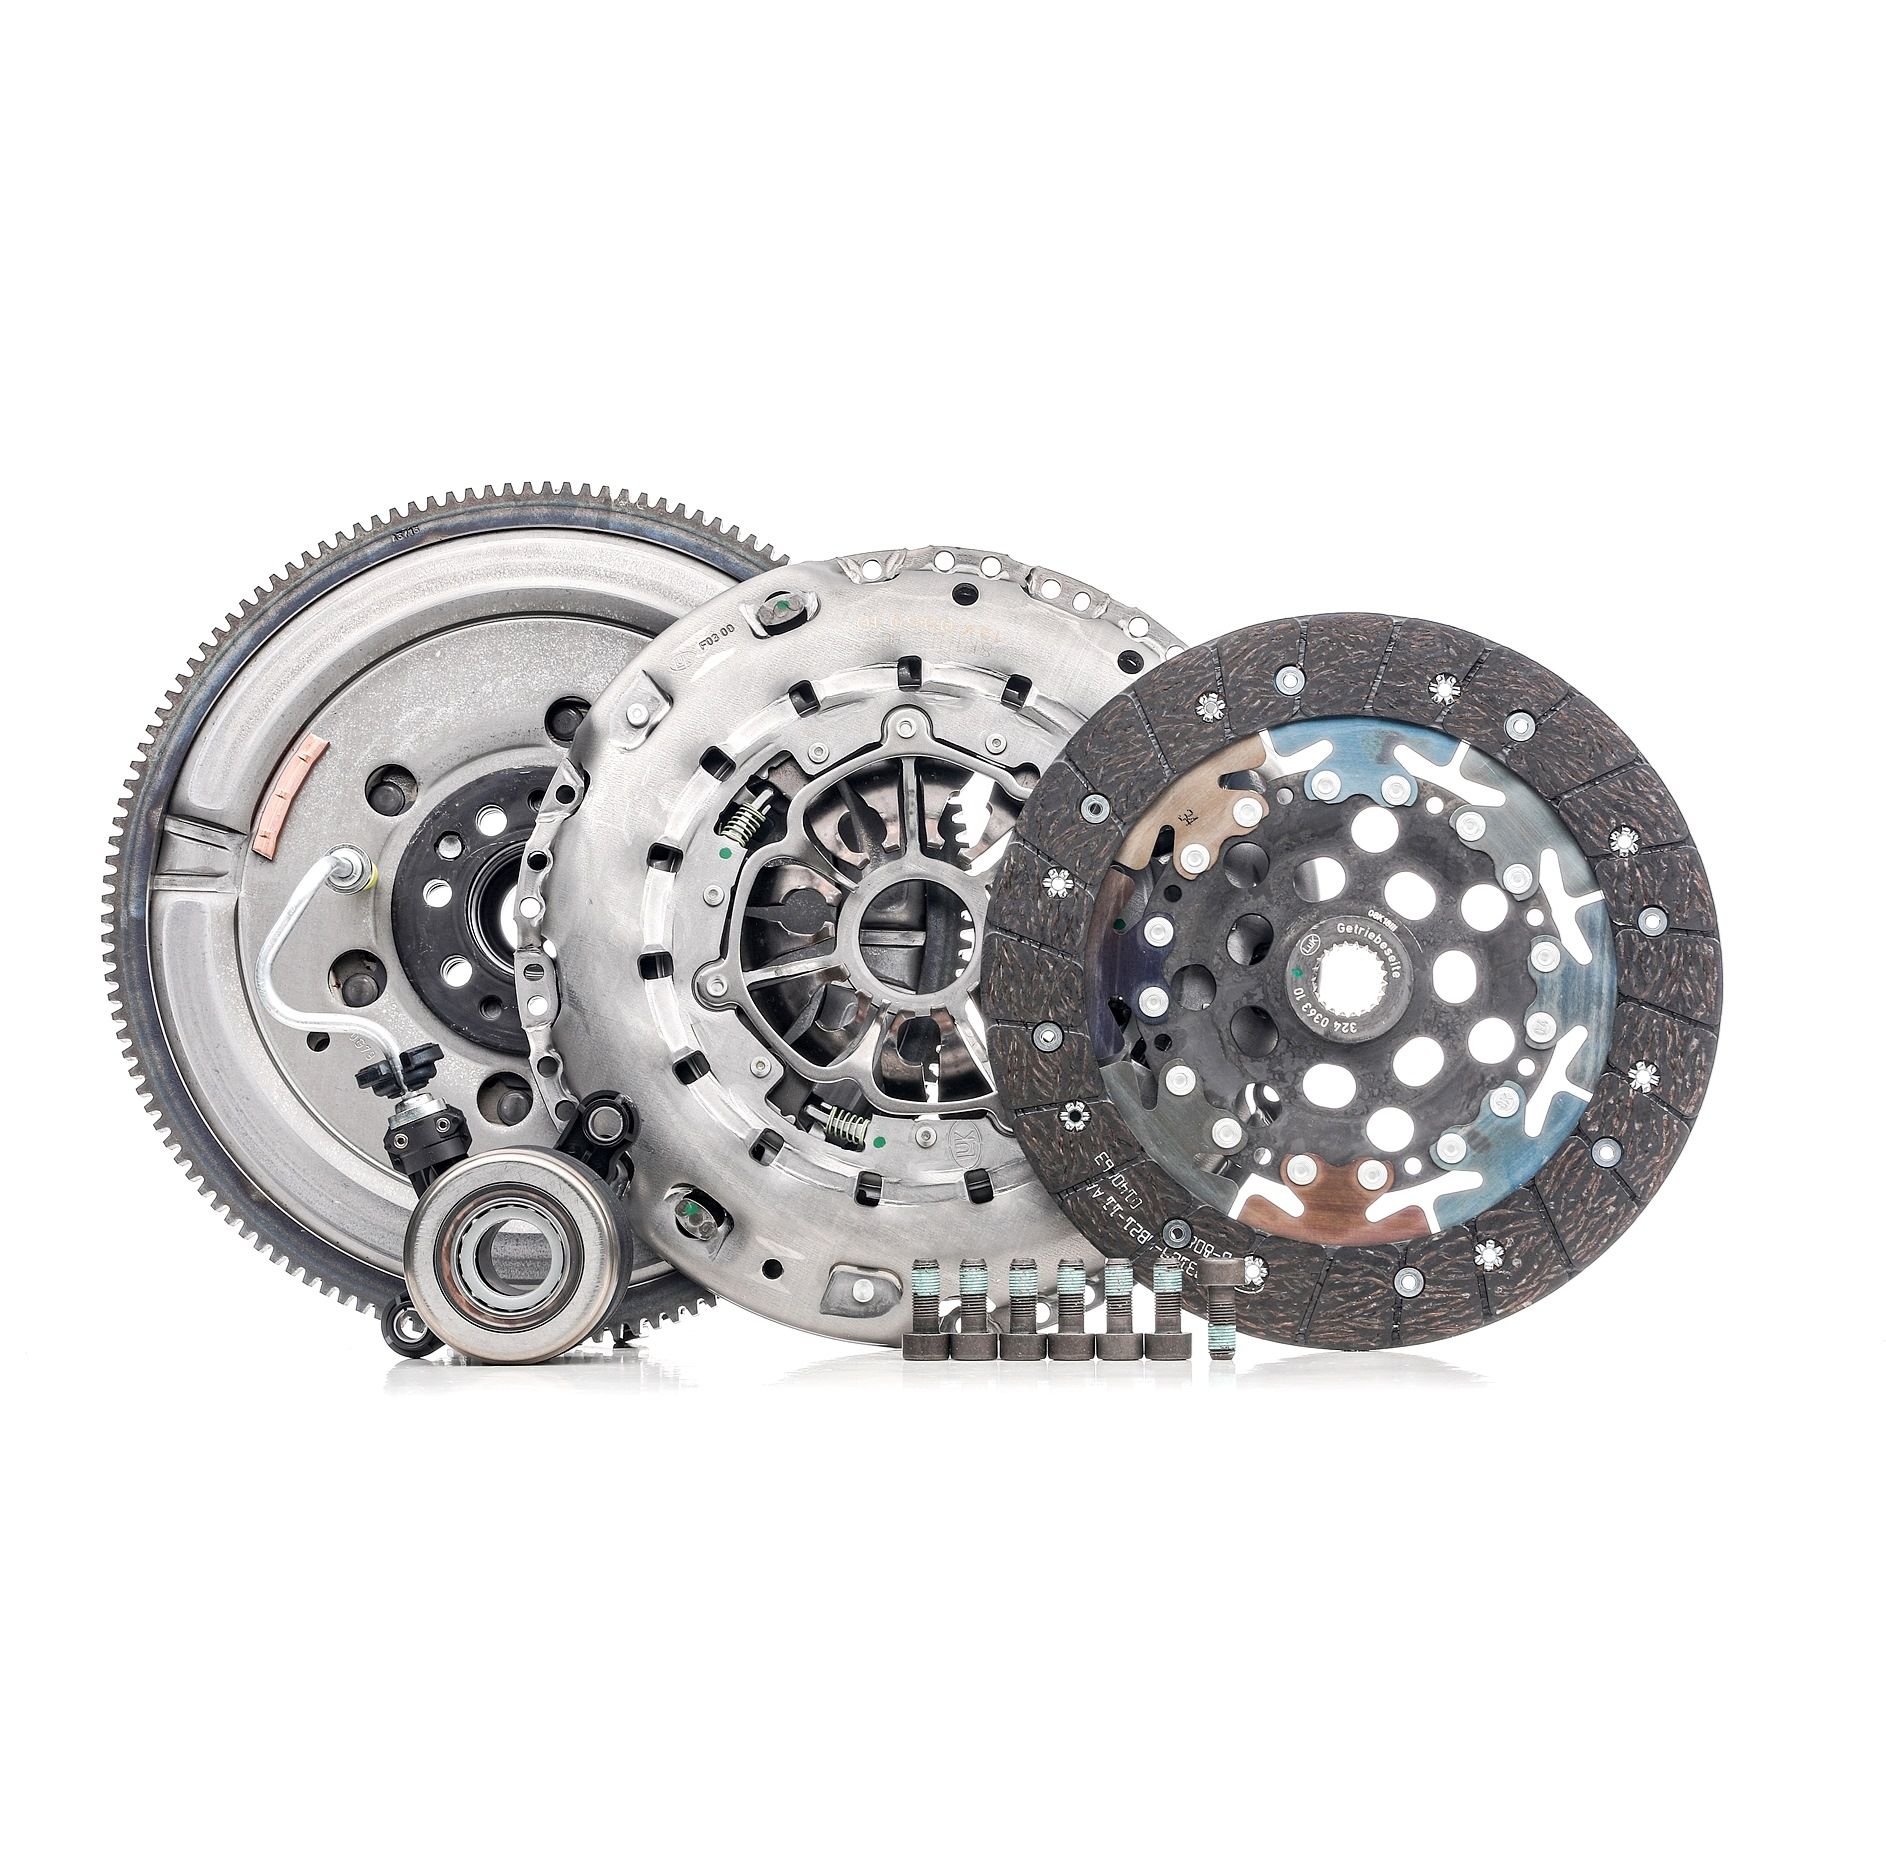 LuK BR 0241 600 0068 00 Clutch kit with central slave cylinder, without pilot bearing, with flywheel, with screw set, Requires special tools for mounting, Dual-mass flywheel with friction control plate, with automatic adjustment